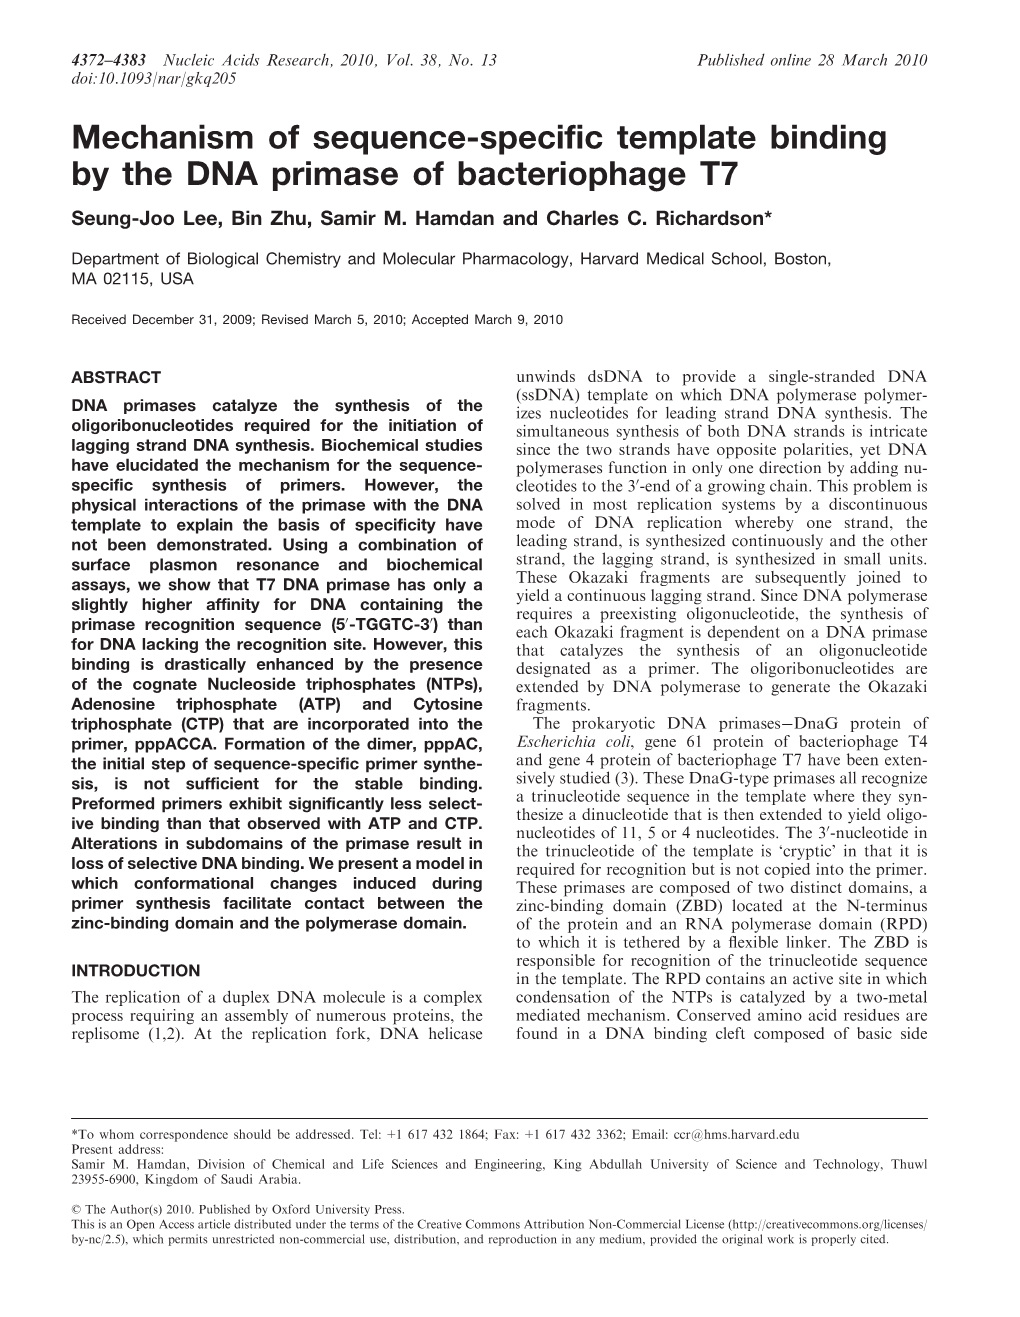 Mechanism of Sequence-Specific Template Binding by the DNA Primase of Bacteriophage T7 Seung-Joo Lee, Bin Zhu, Samir M